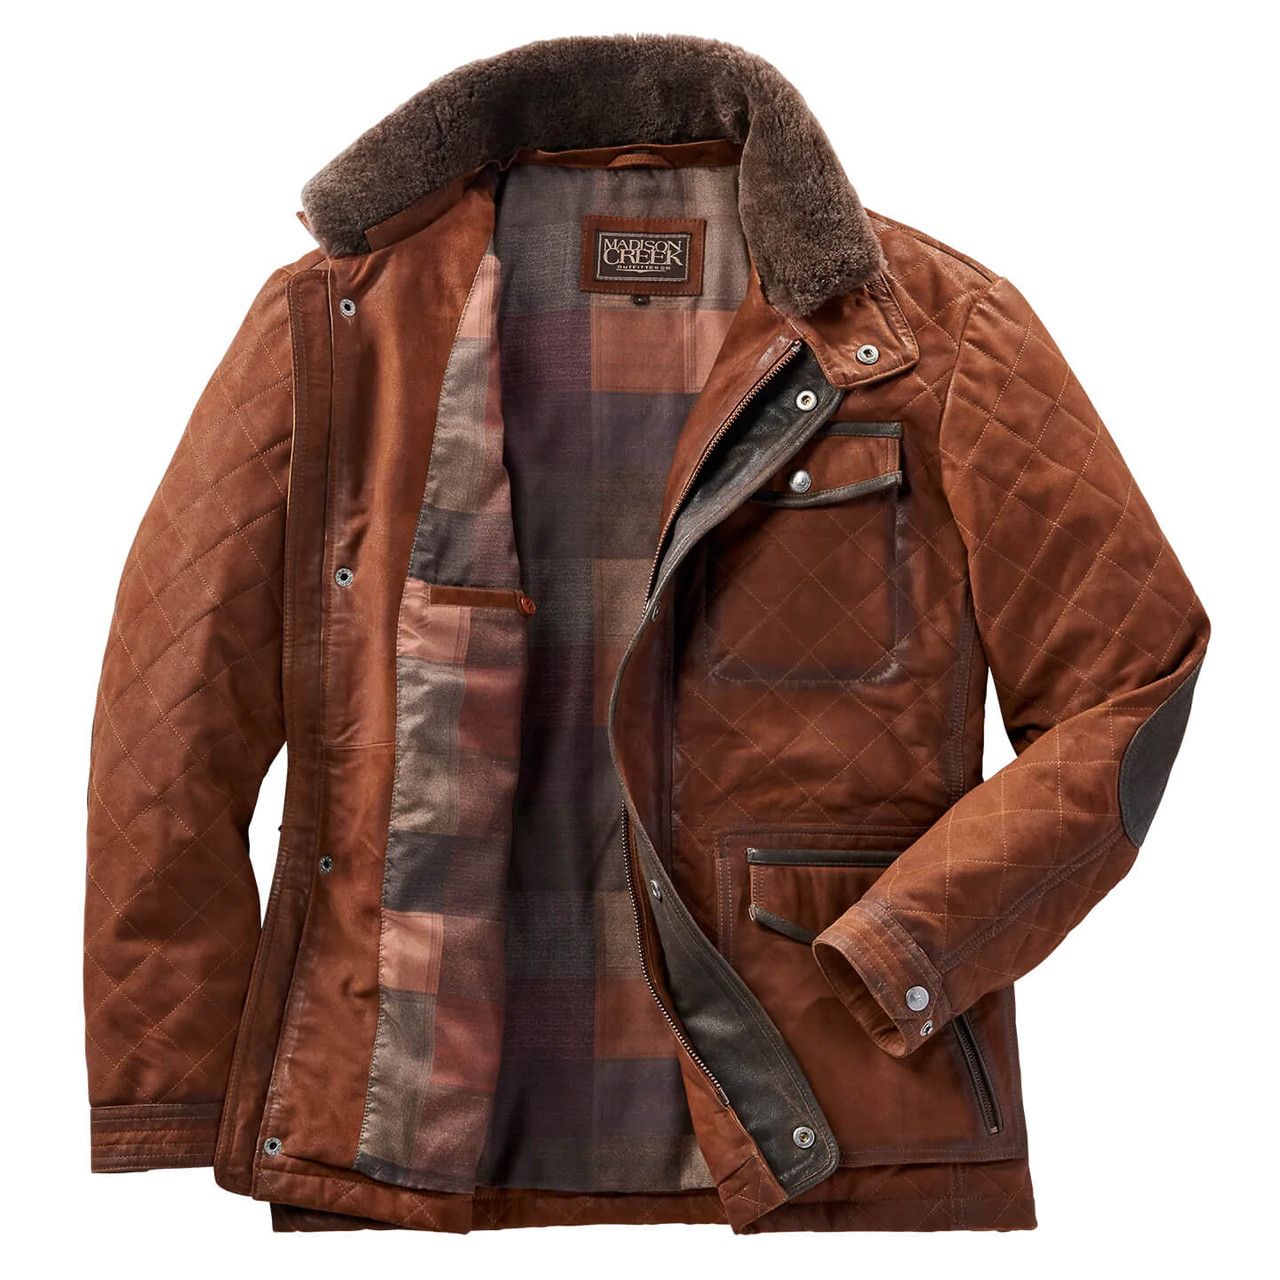 SEDONA GOAT LEATHER JACKET IN BOURBON BY MADISON CREEK - Y-Bell